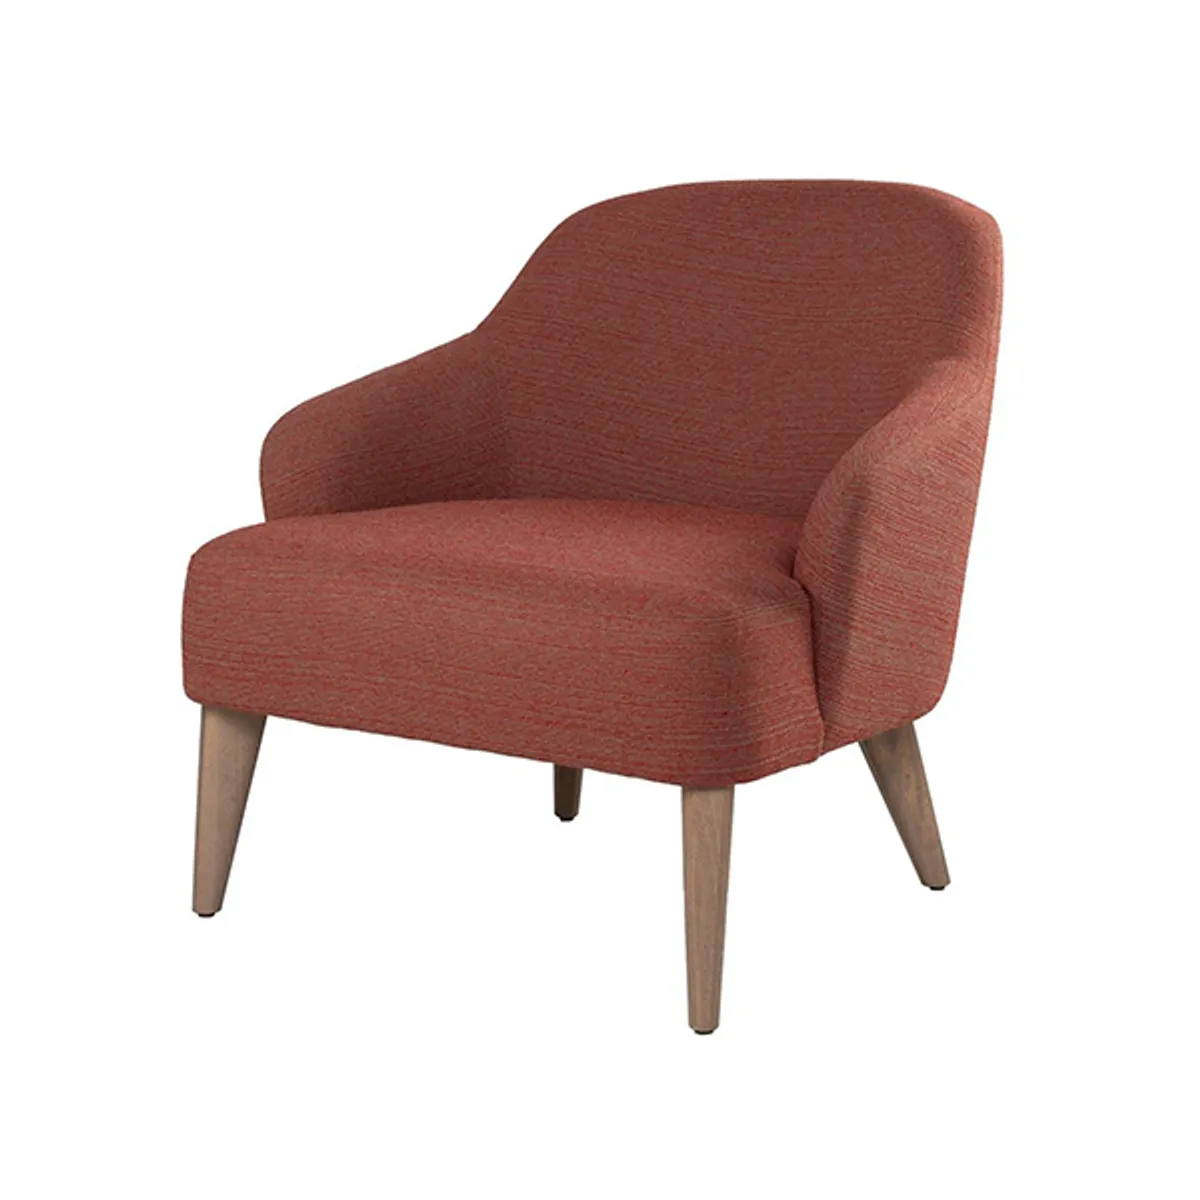 Keat 3 lounge chair Upholstered hotel furniture by insideoutcontracts